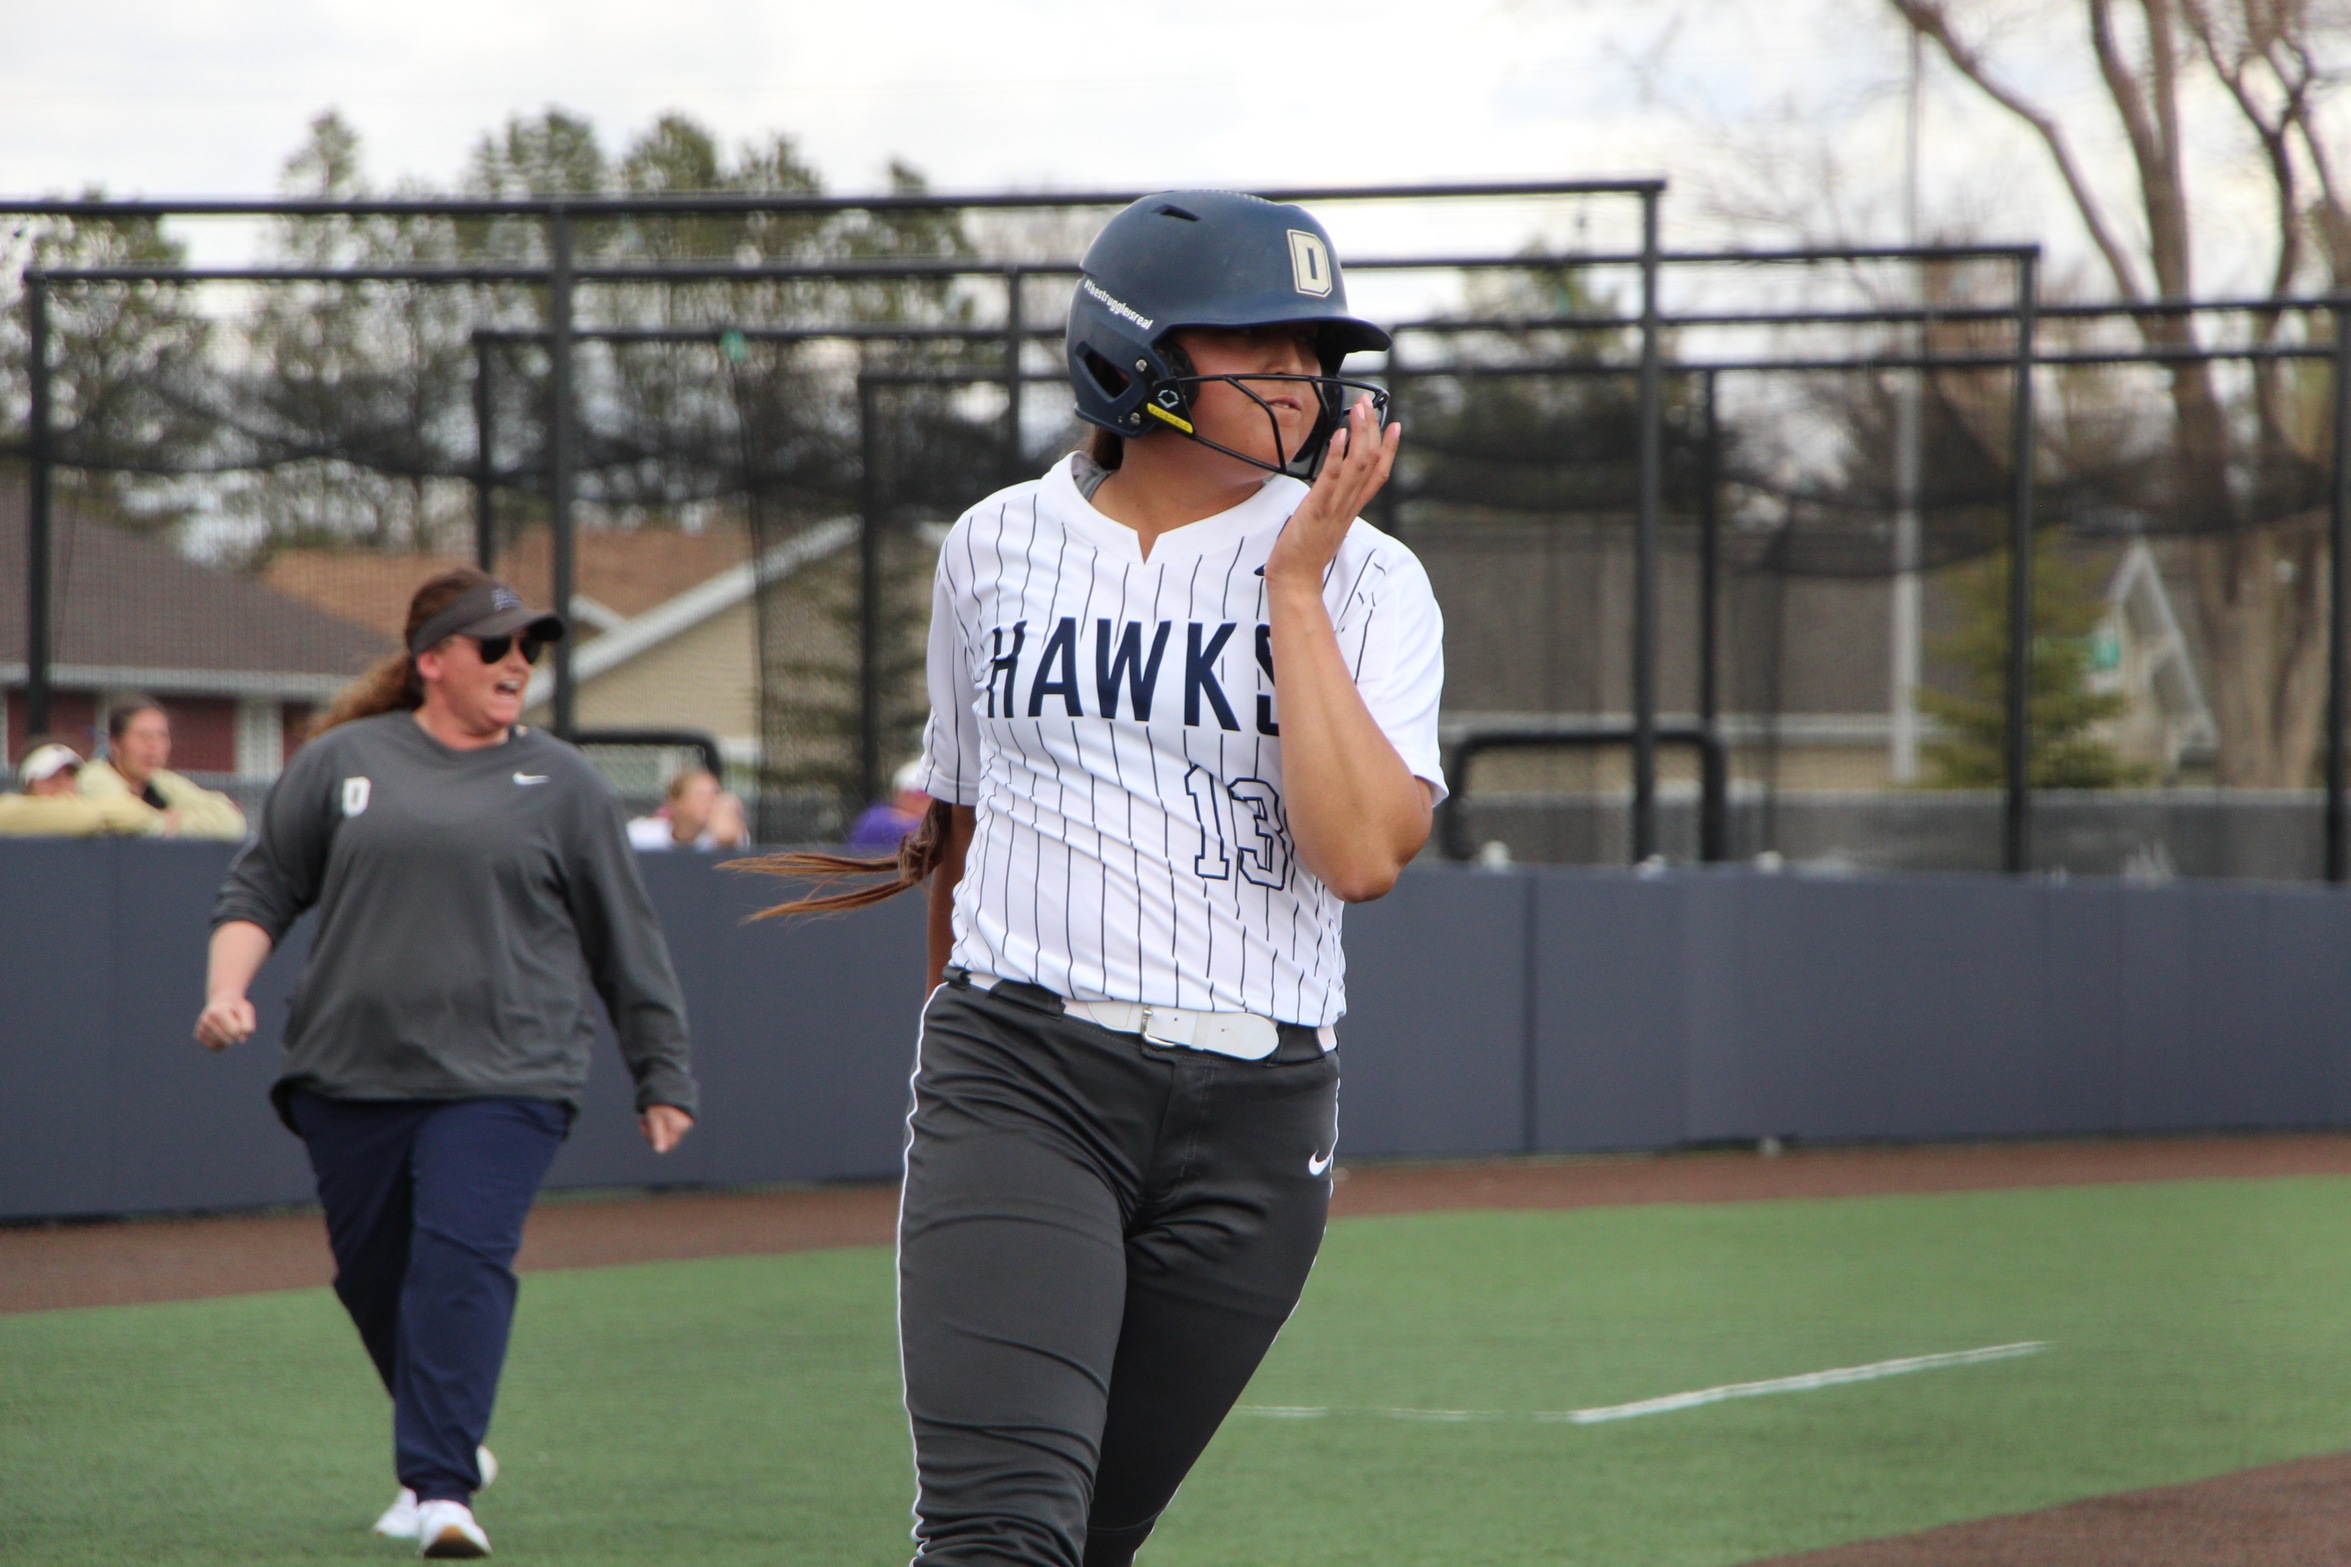 Paiva named Honorable Mention All-American by NAIA